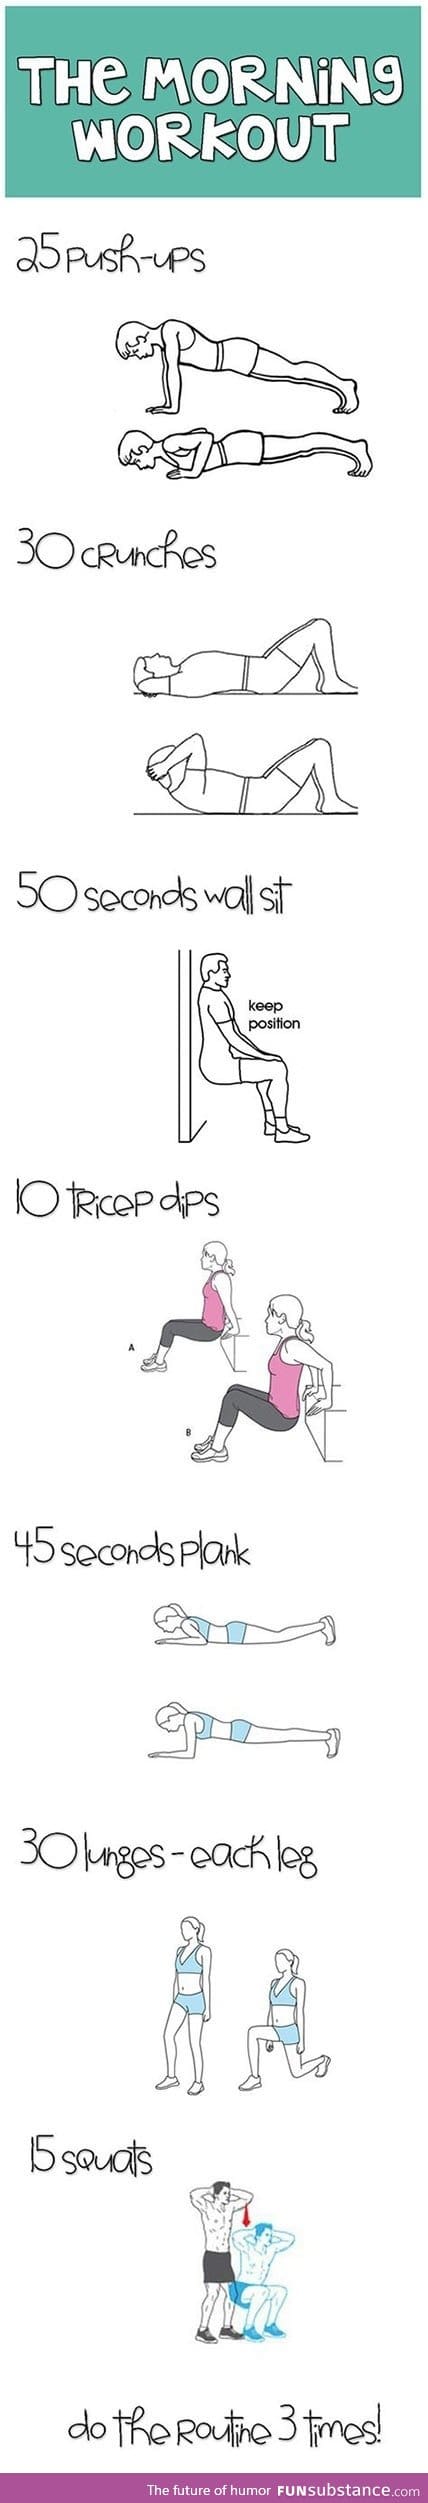 A good workout routine to start your day